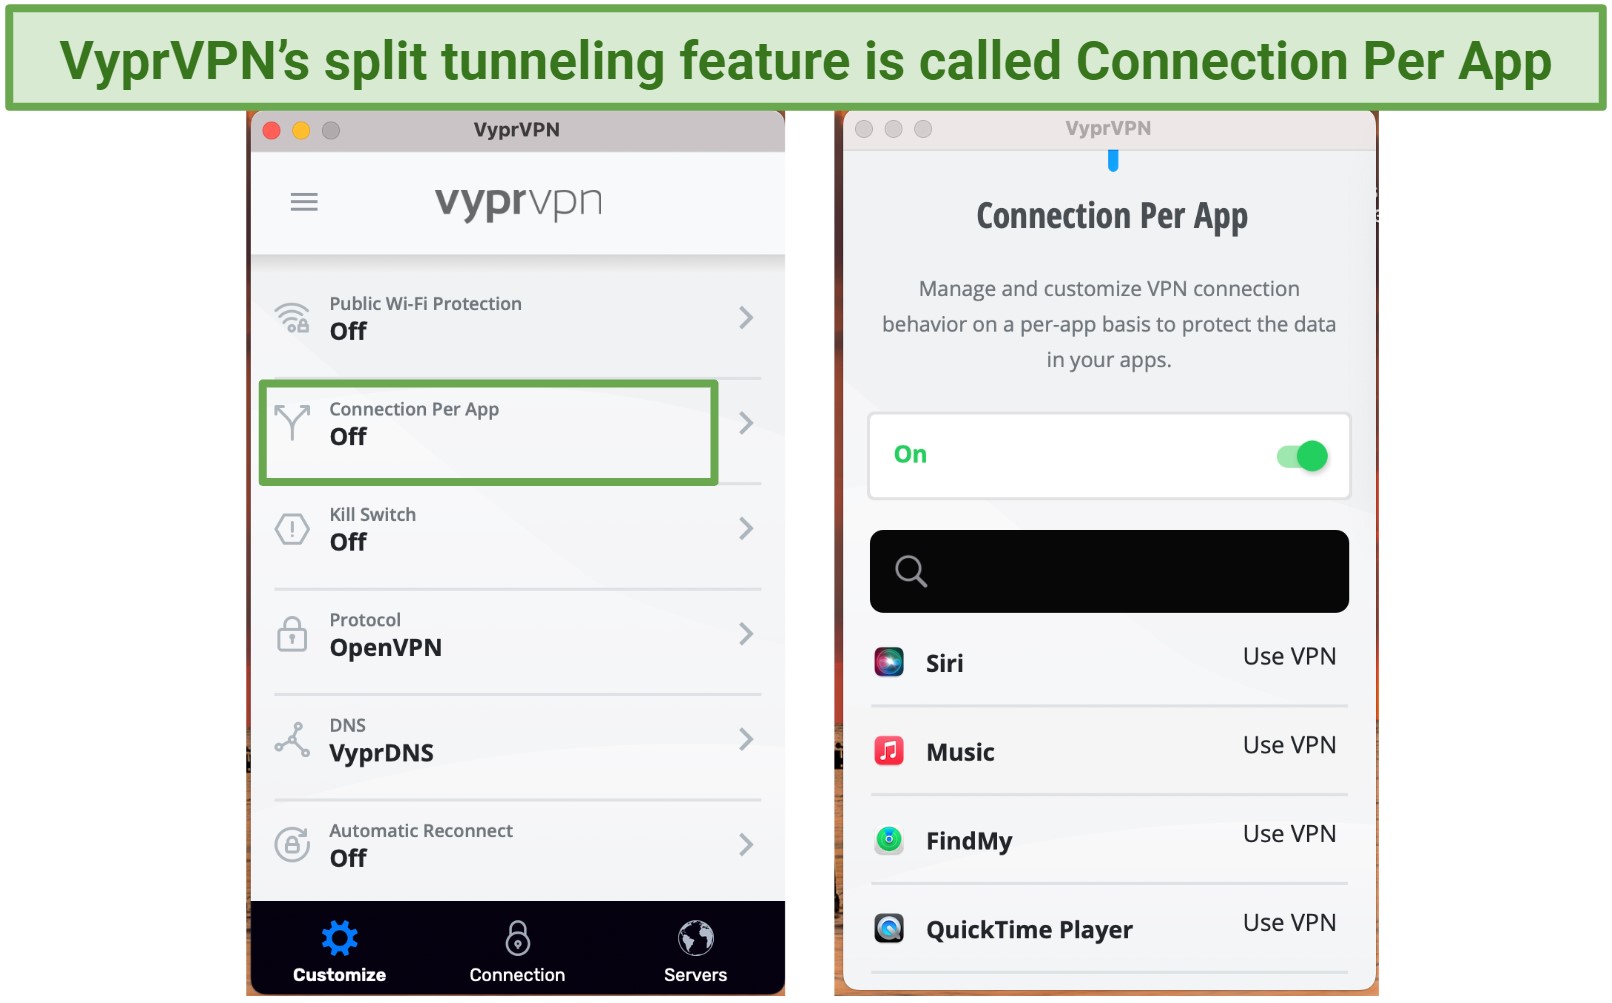 Screenshot of VyprVPN settings include Connection Per App feature